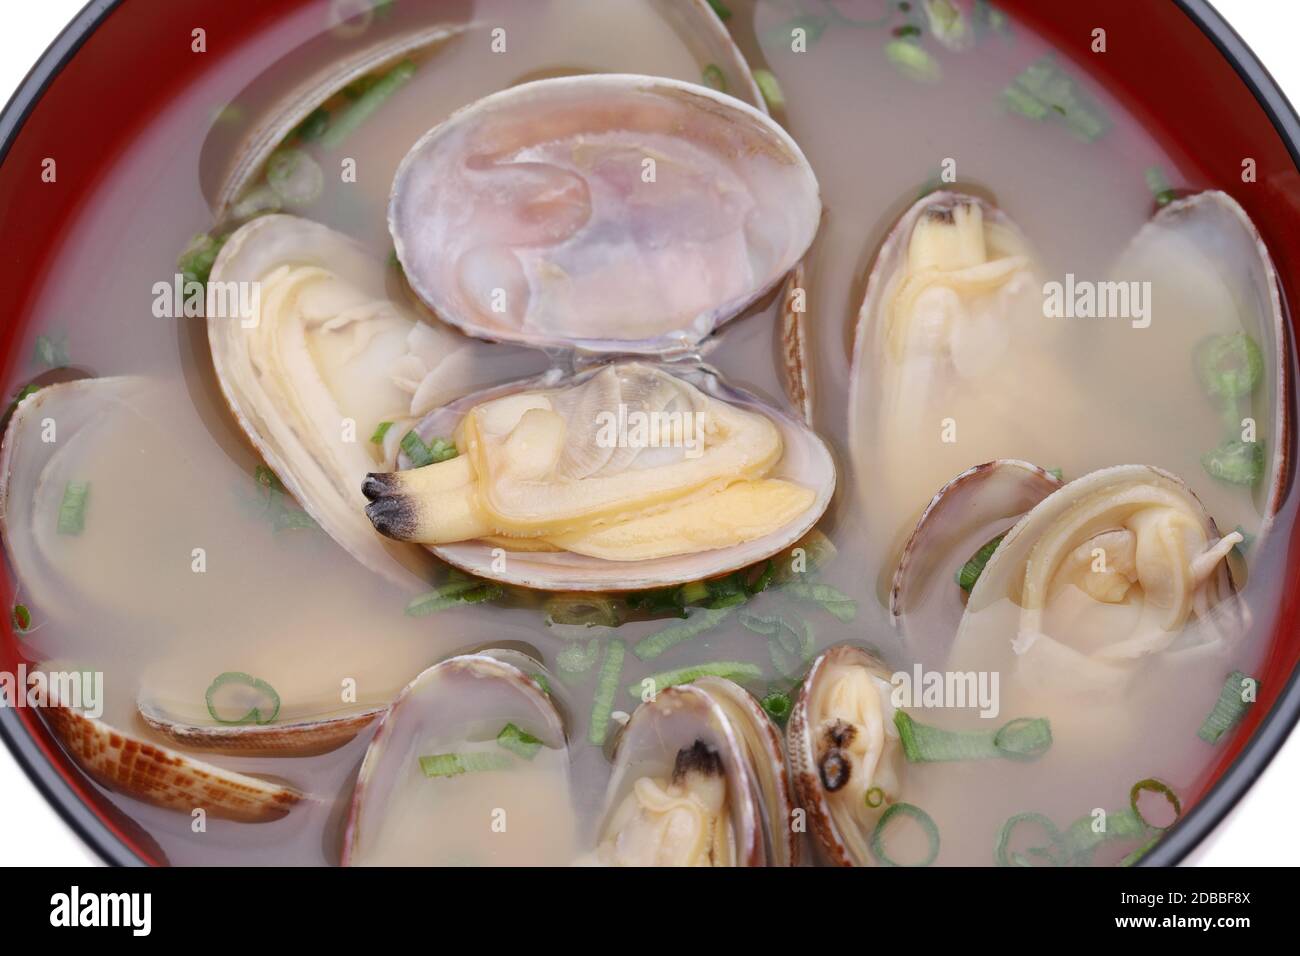 Close up of Japanese miso soup with asari clams in a bowl Stock Photo